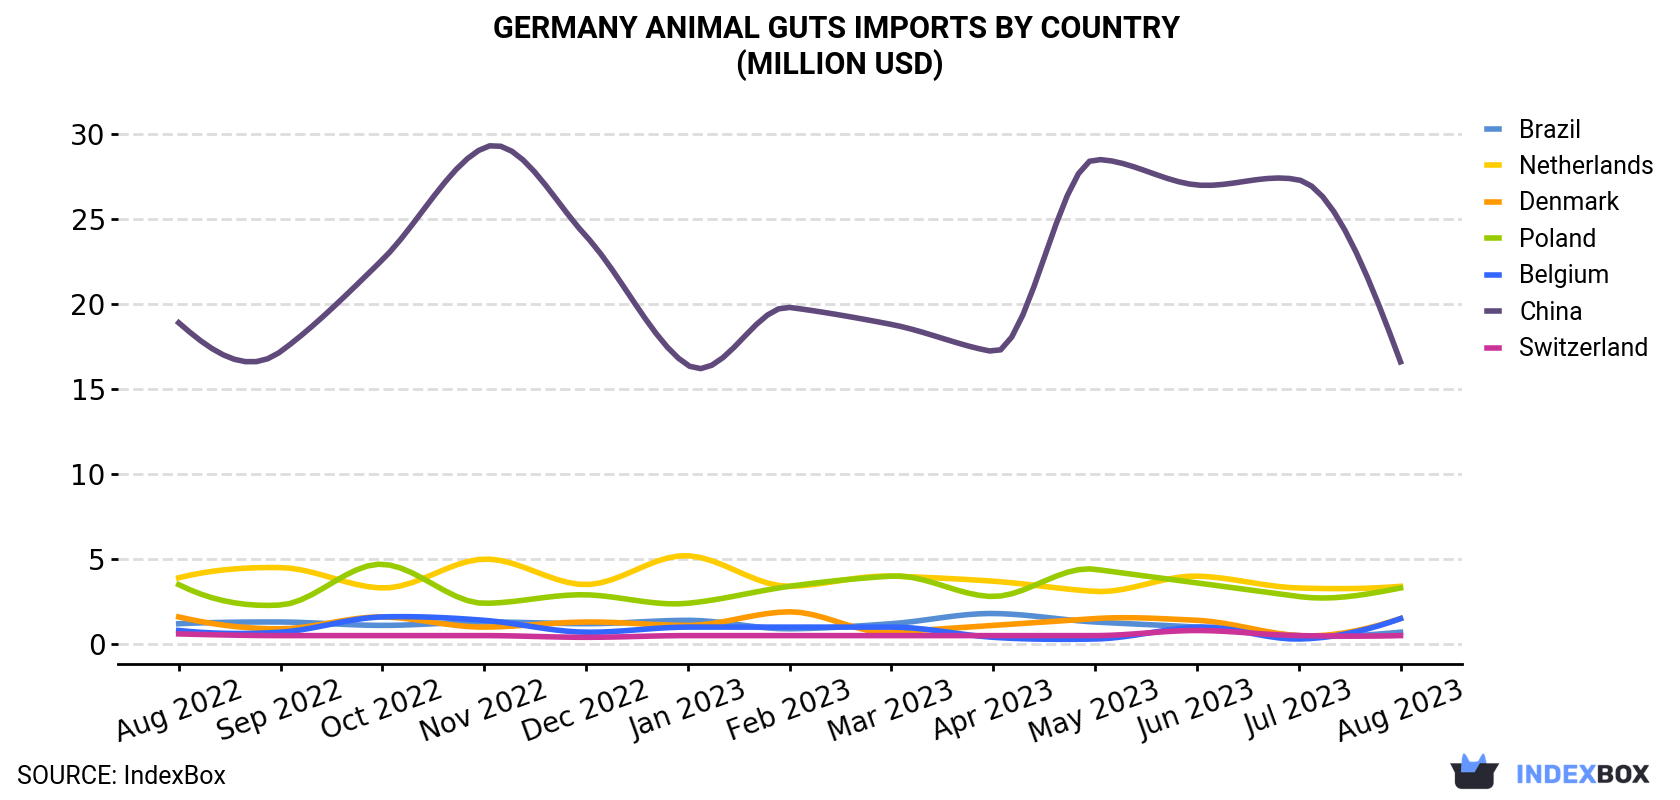 Germany Animal Guts Imports By Country (Million USD)